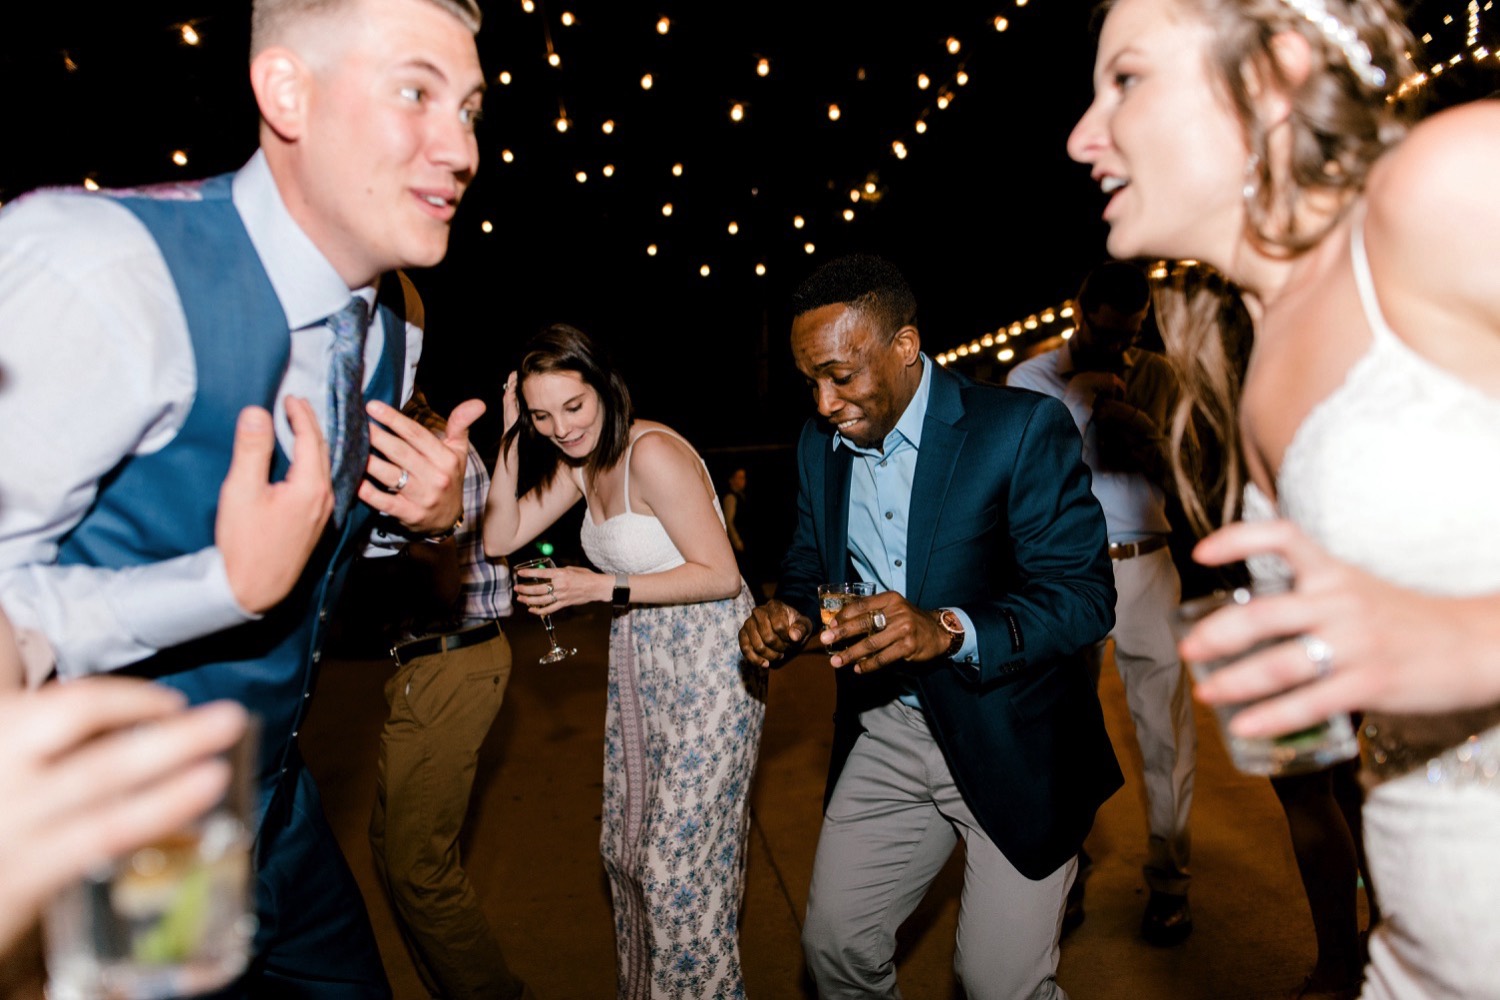 The dance floor was packed all night long for Kristen and Charlton's wedding reception at Spruce Mountain Ranch in Larkspur, Colorado.